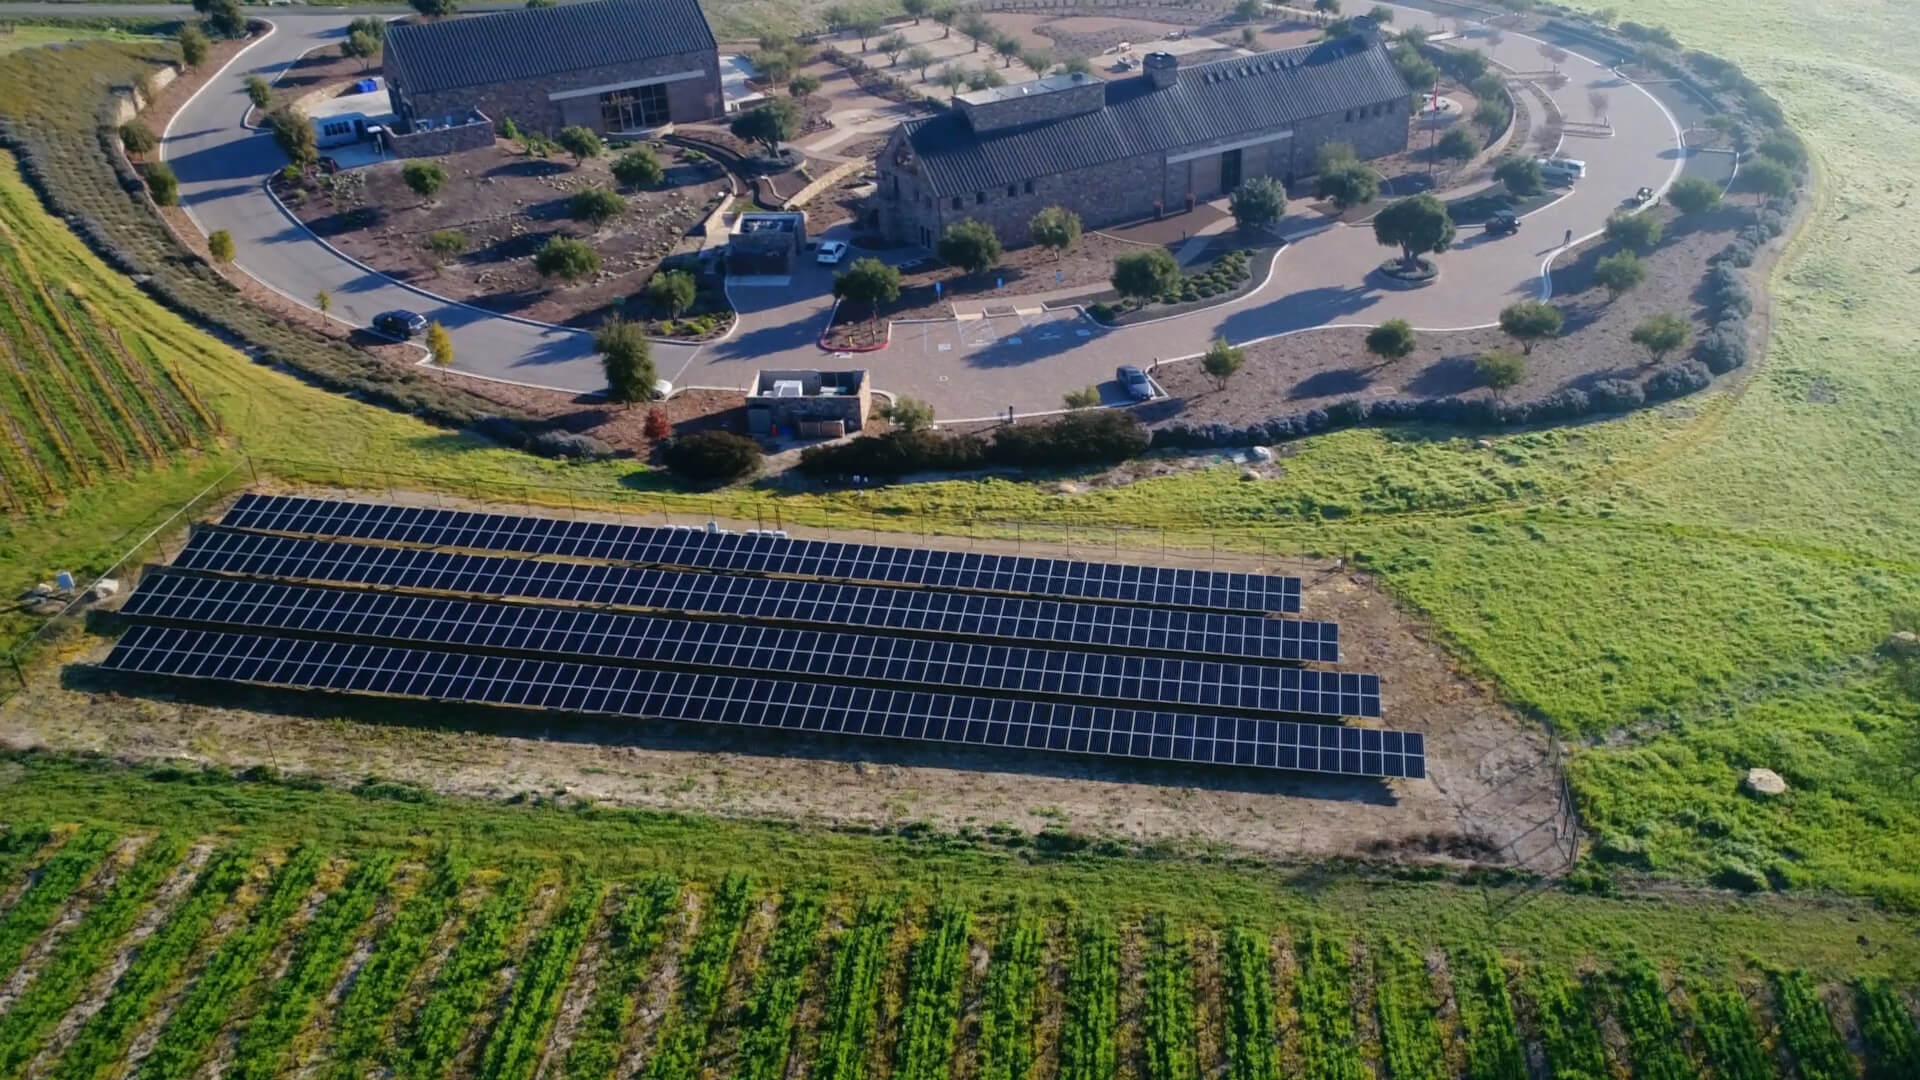 A drone shot showing a green landscape, with solar panels in a field and a stone tasting room.